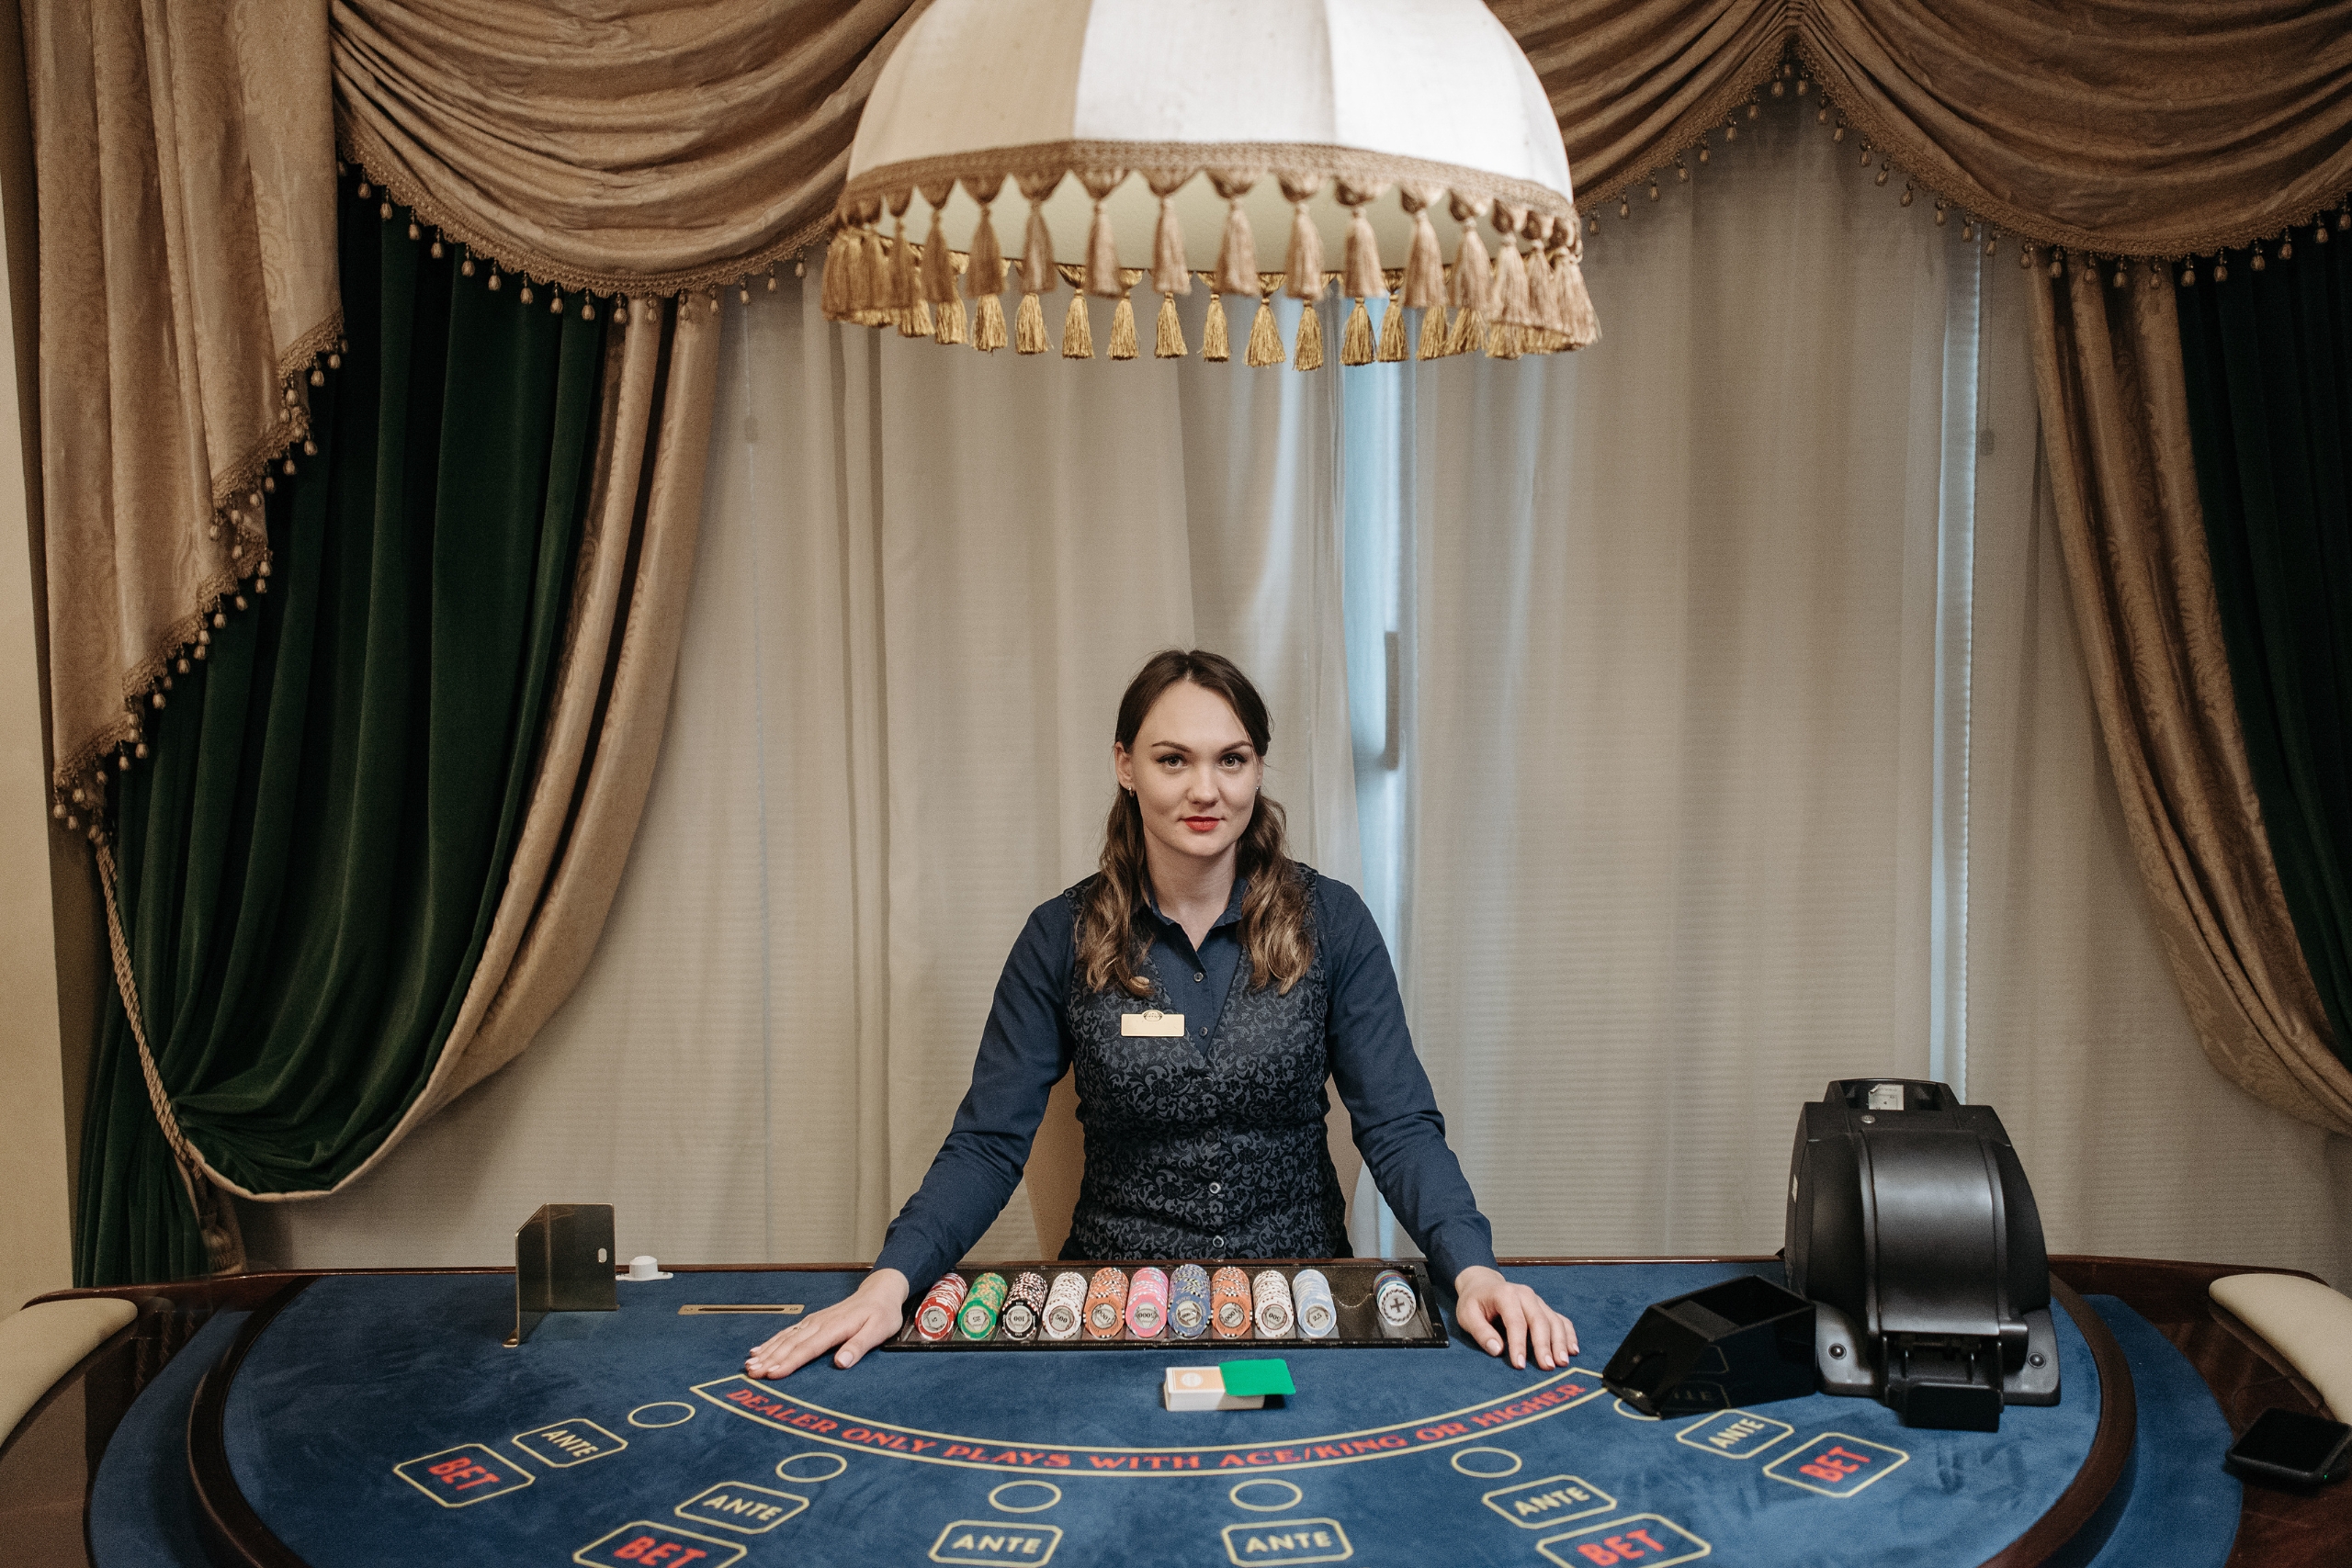 A Woman Card Dealer Posing and Smiling